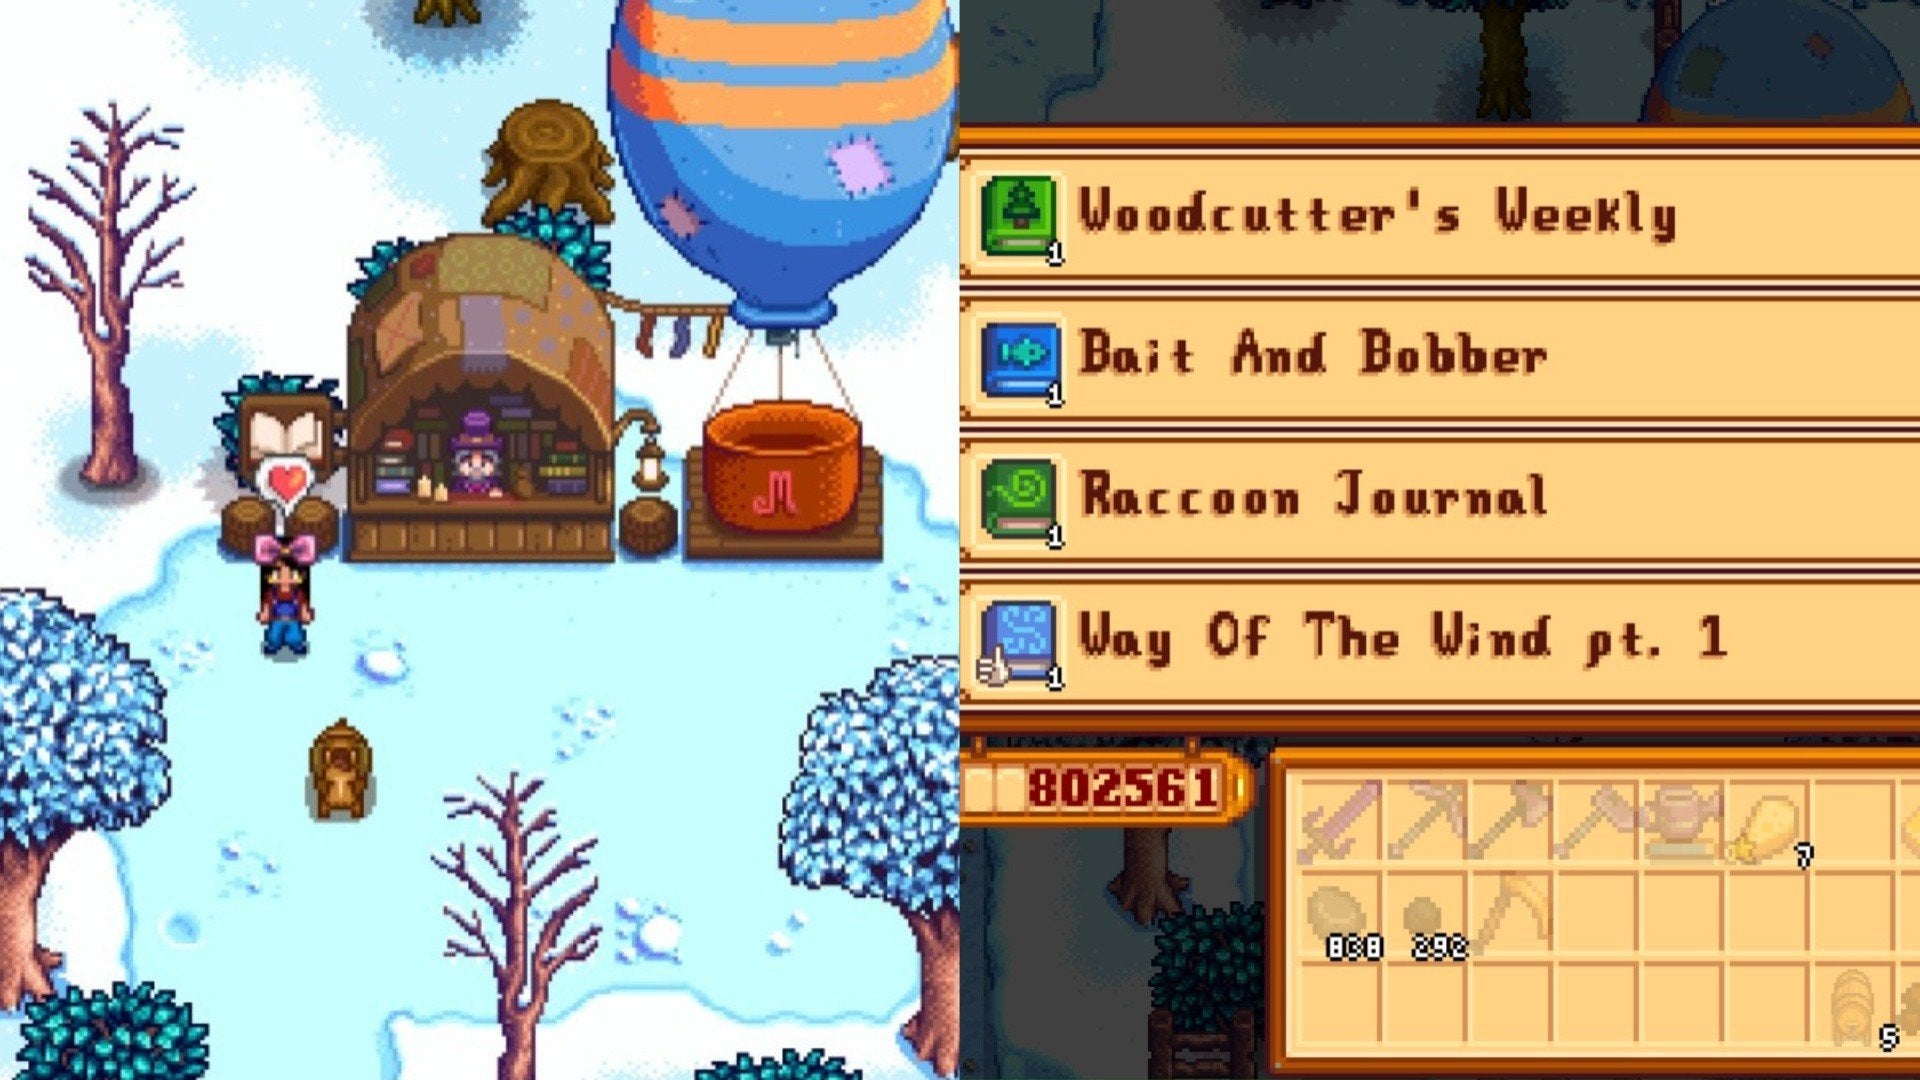 A player looking at the Bookseller's inventory in Stardew Valley.